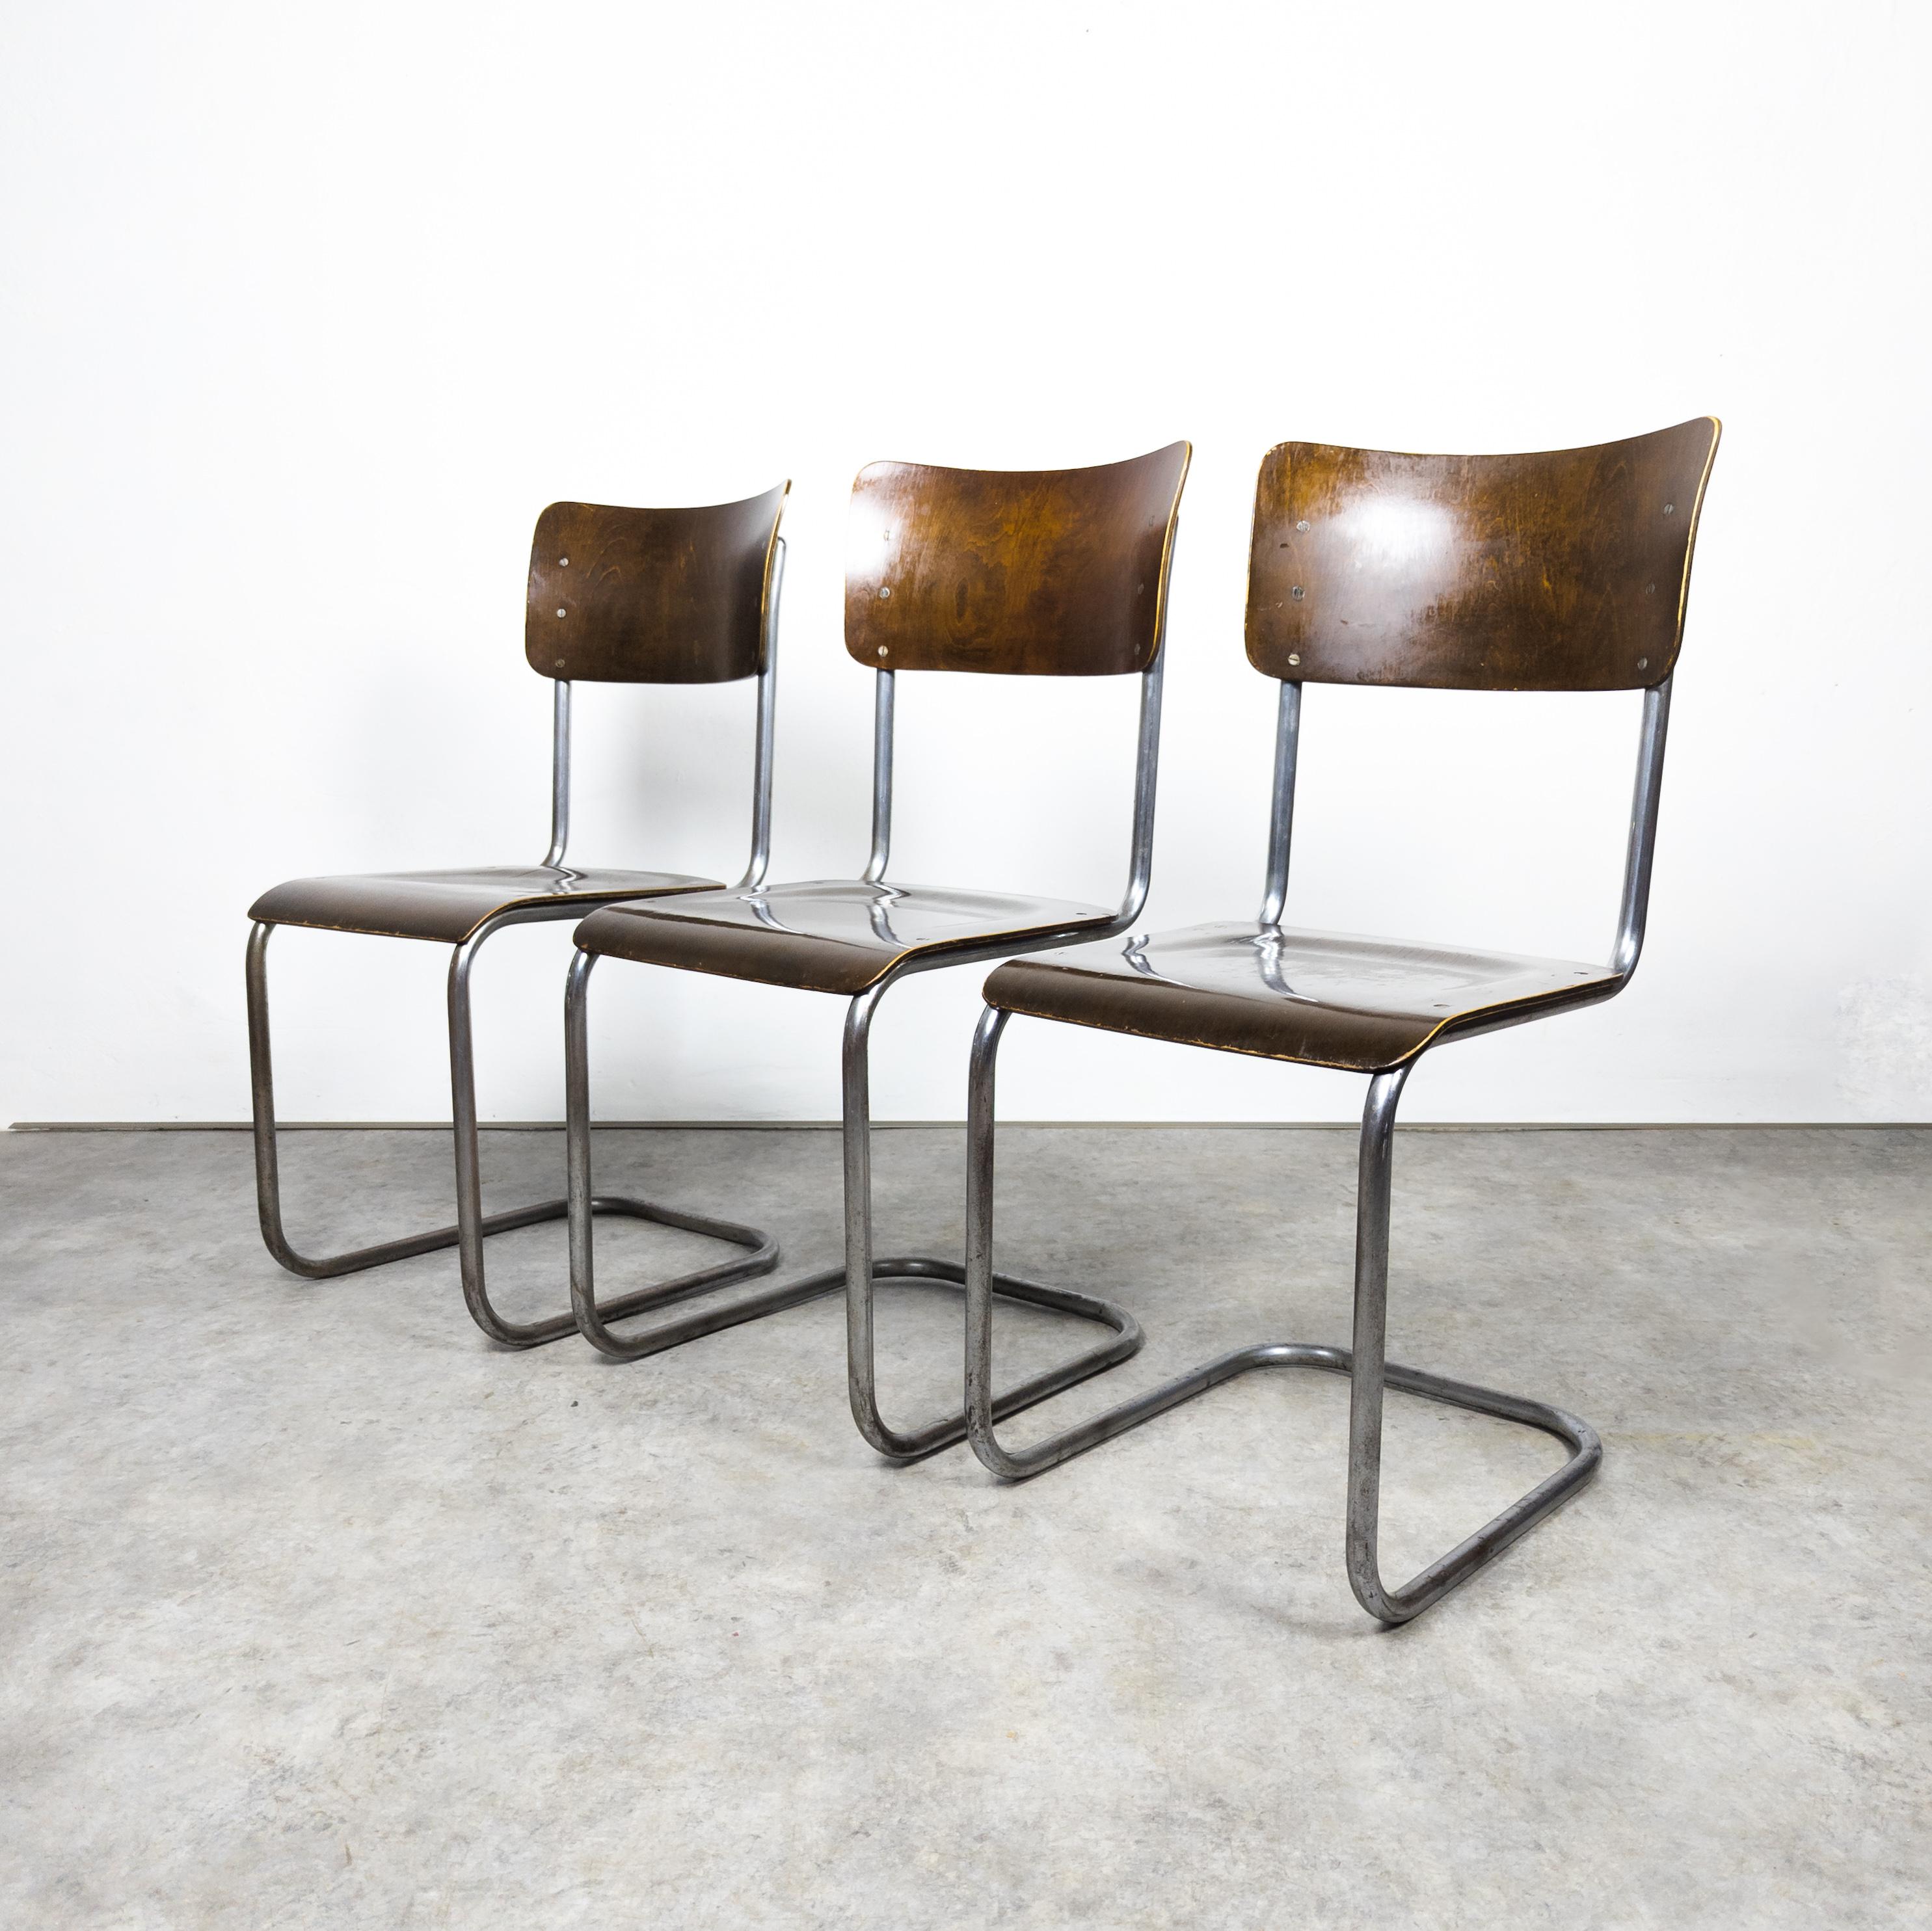 Rare version manufactured by Vichr & co. , former Czechoslovakia in the 1930s. Set of three Bauhaus cantilever chairs with a sturdy tubular steel frame, showcasing vintage charm. The steel elements exhibit distinct signs of aging, while the wooden